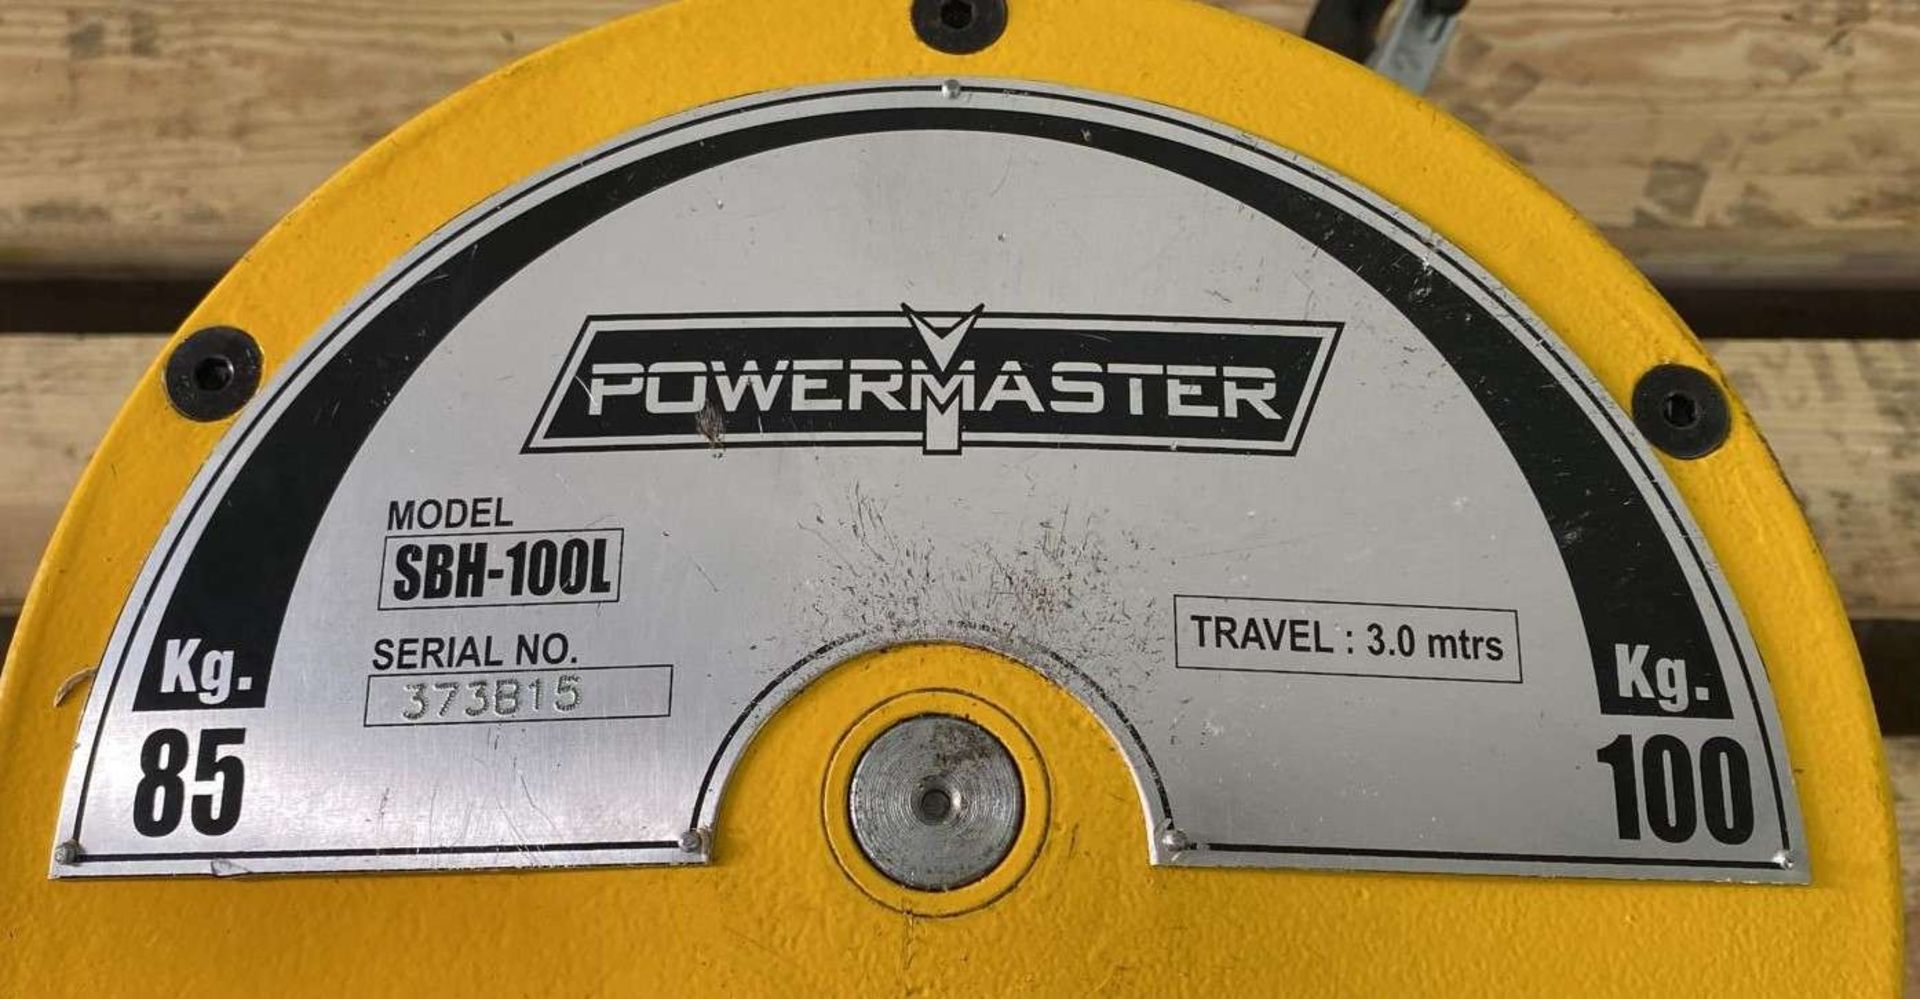 Powermaster Heavy Weight Balancer up to 100kg - Image 4 of 4